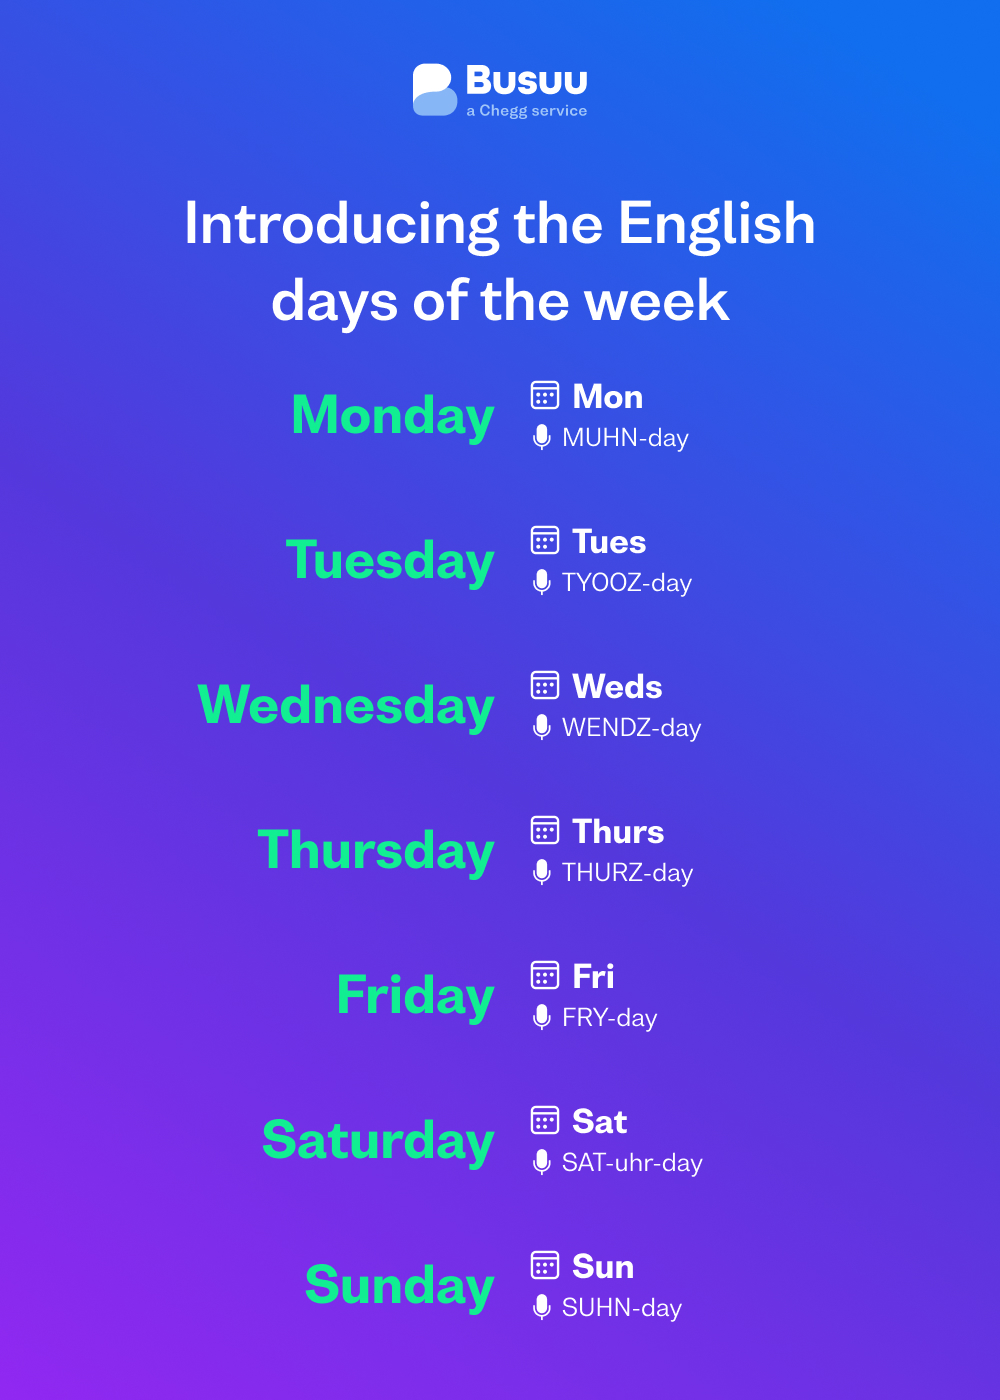 English days of the week chart, courtesy of language-learning app Busuu's English days of the week guide